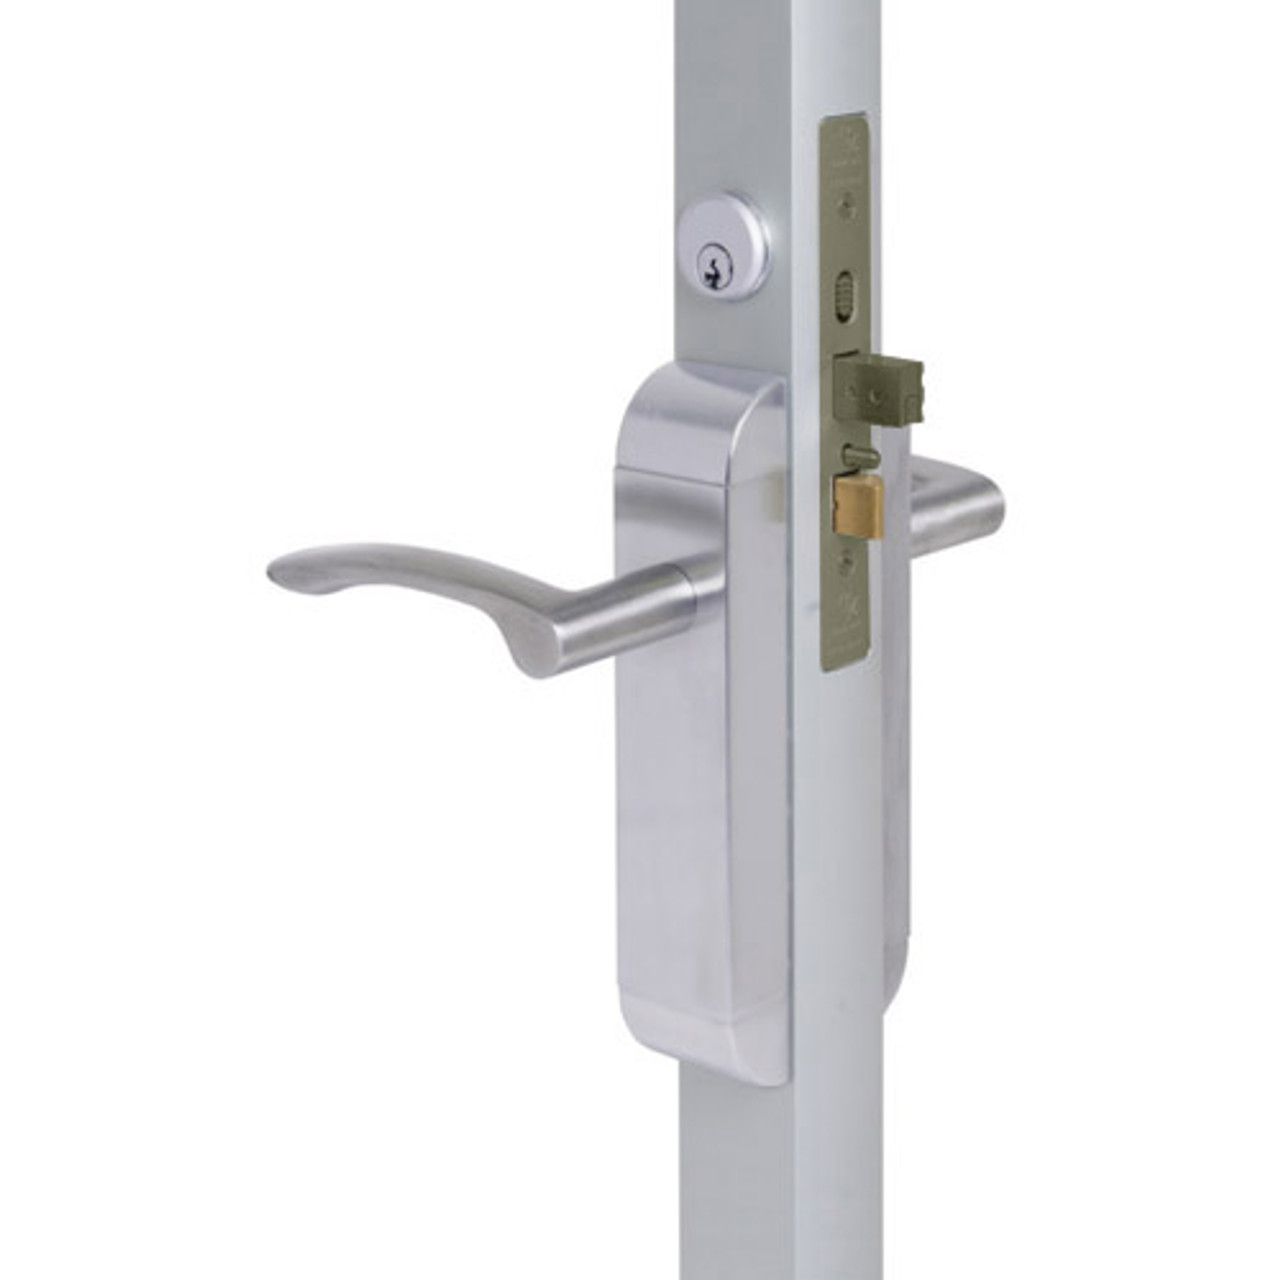 2190-412-202-32 Adams Rite Dual Force Interconnected 2190 series Deadlock/Deadlatch in Bright Stainless